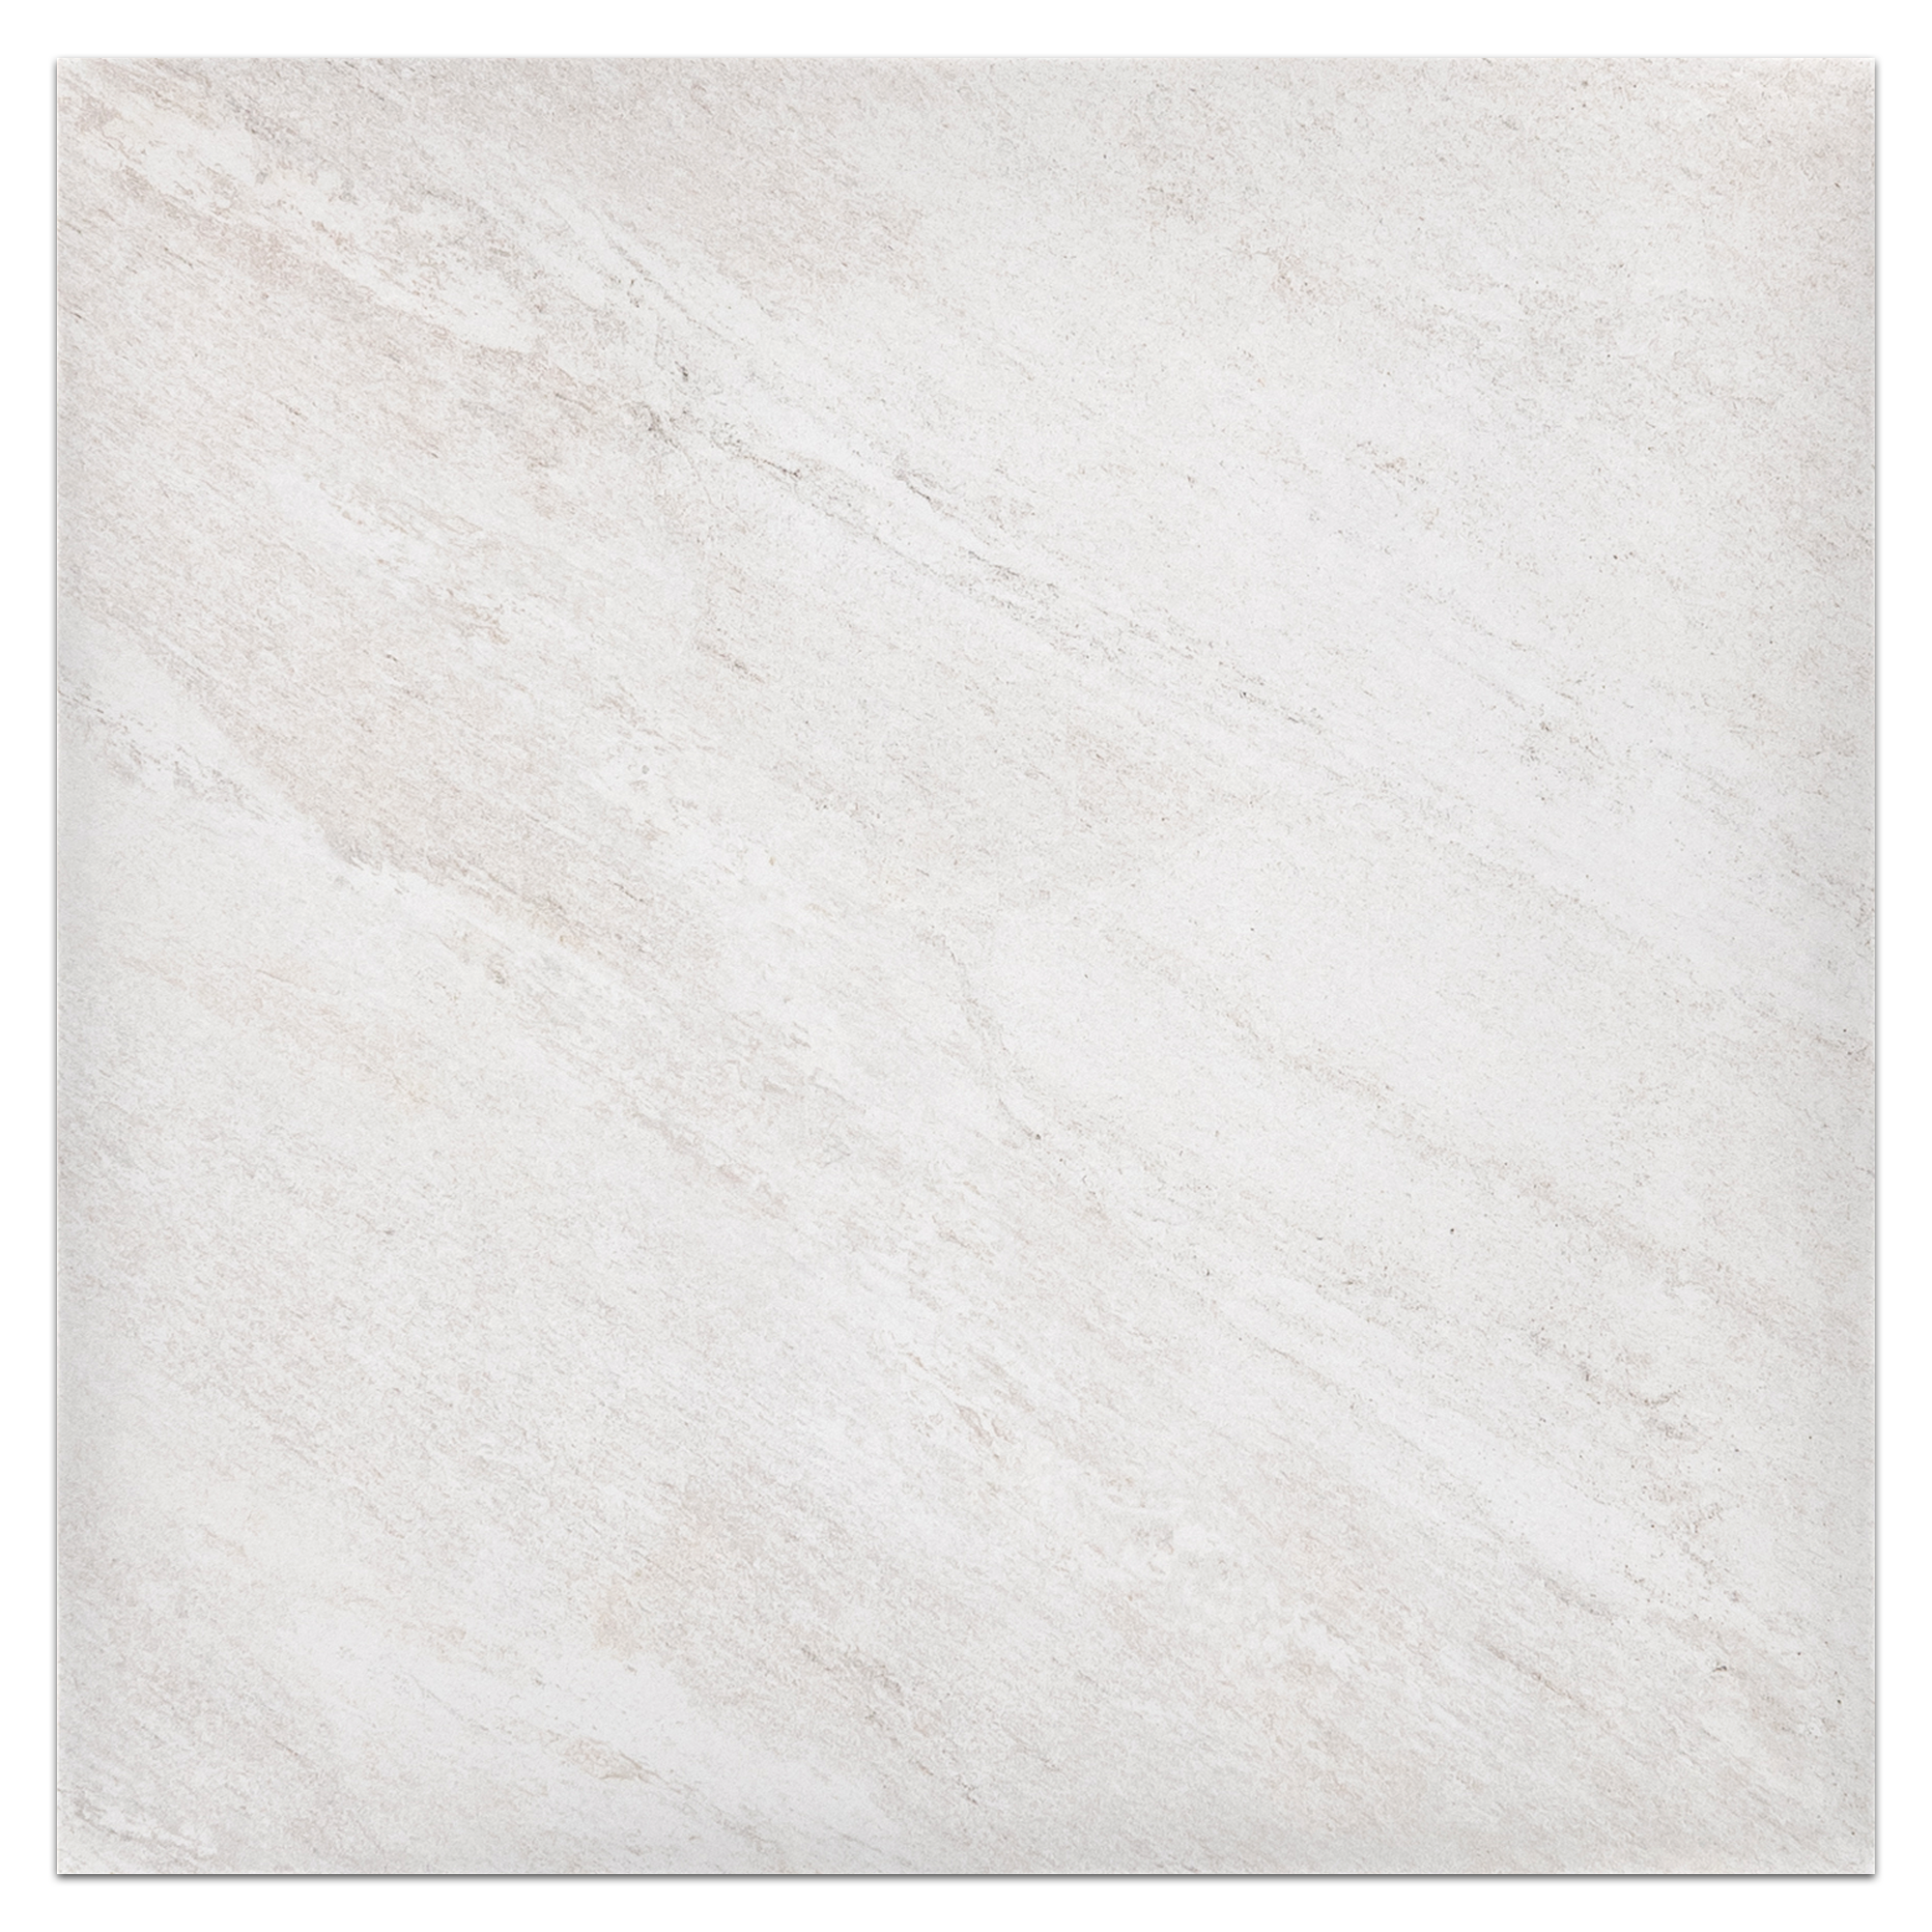 Elon Ecostone White Porcelain Square Field Tile 24x24x9mm Natural SP142 Surface Group International Product